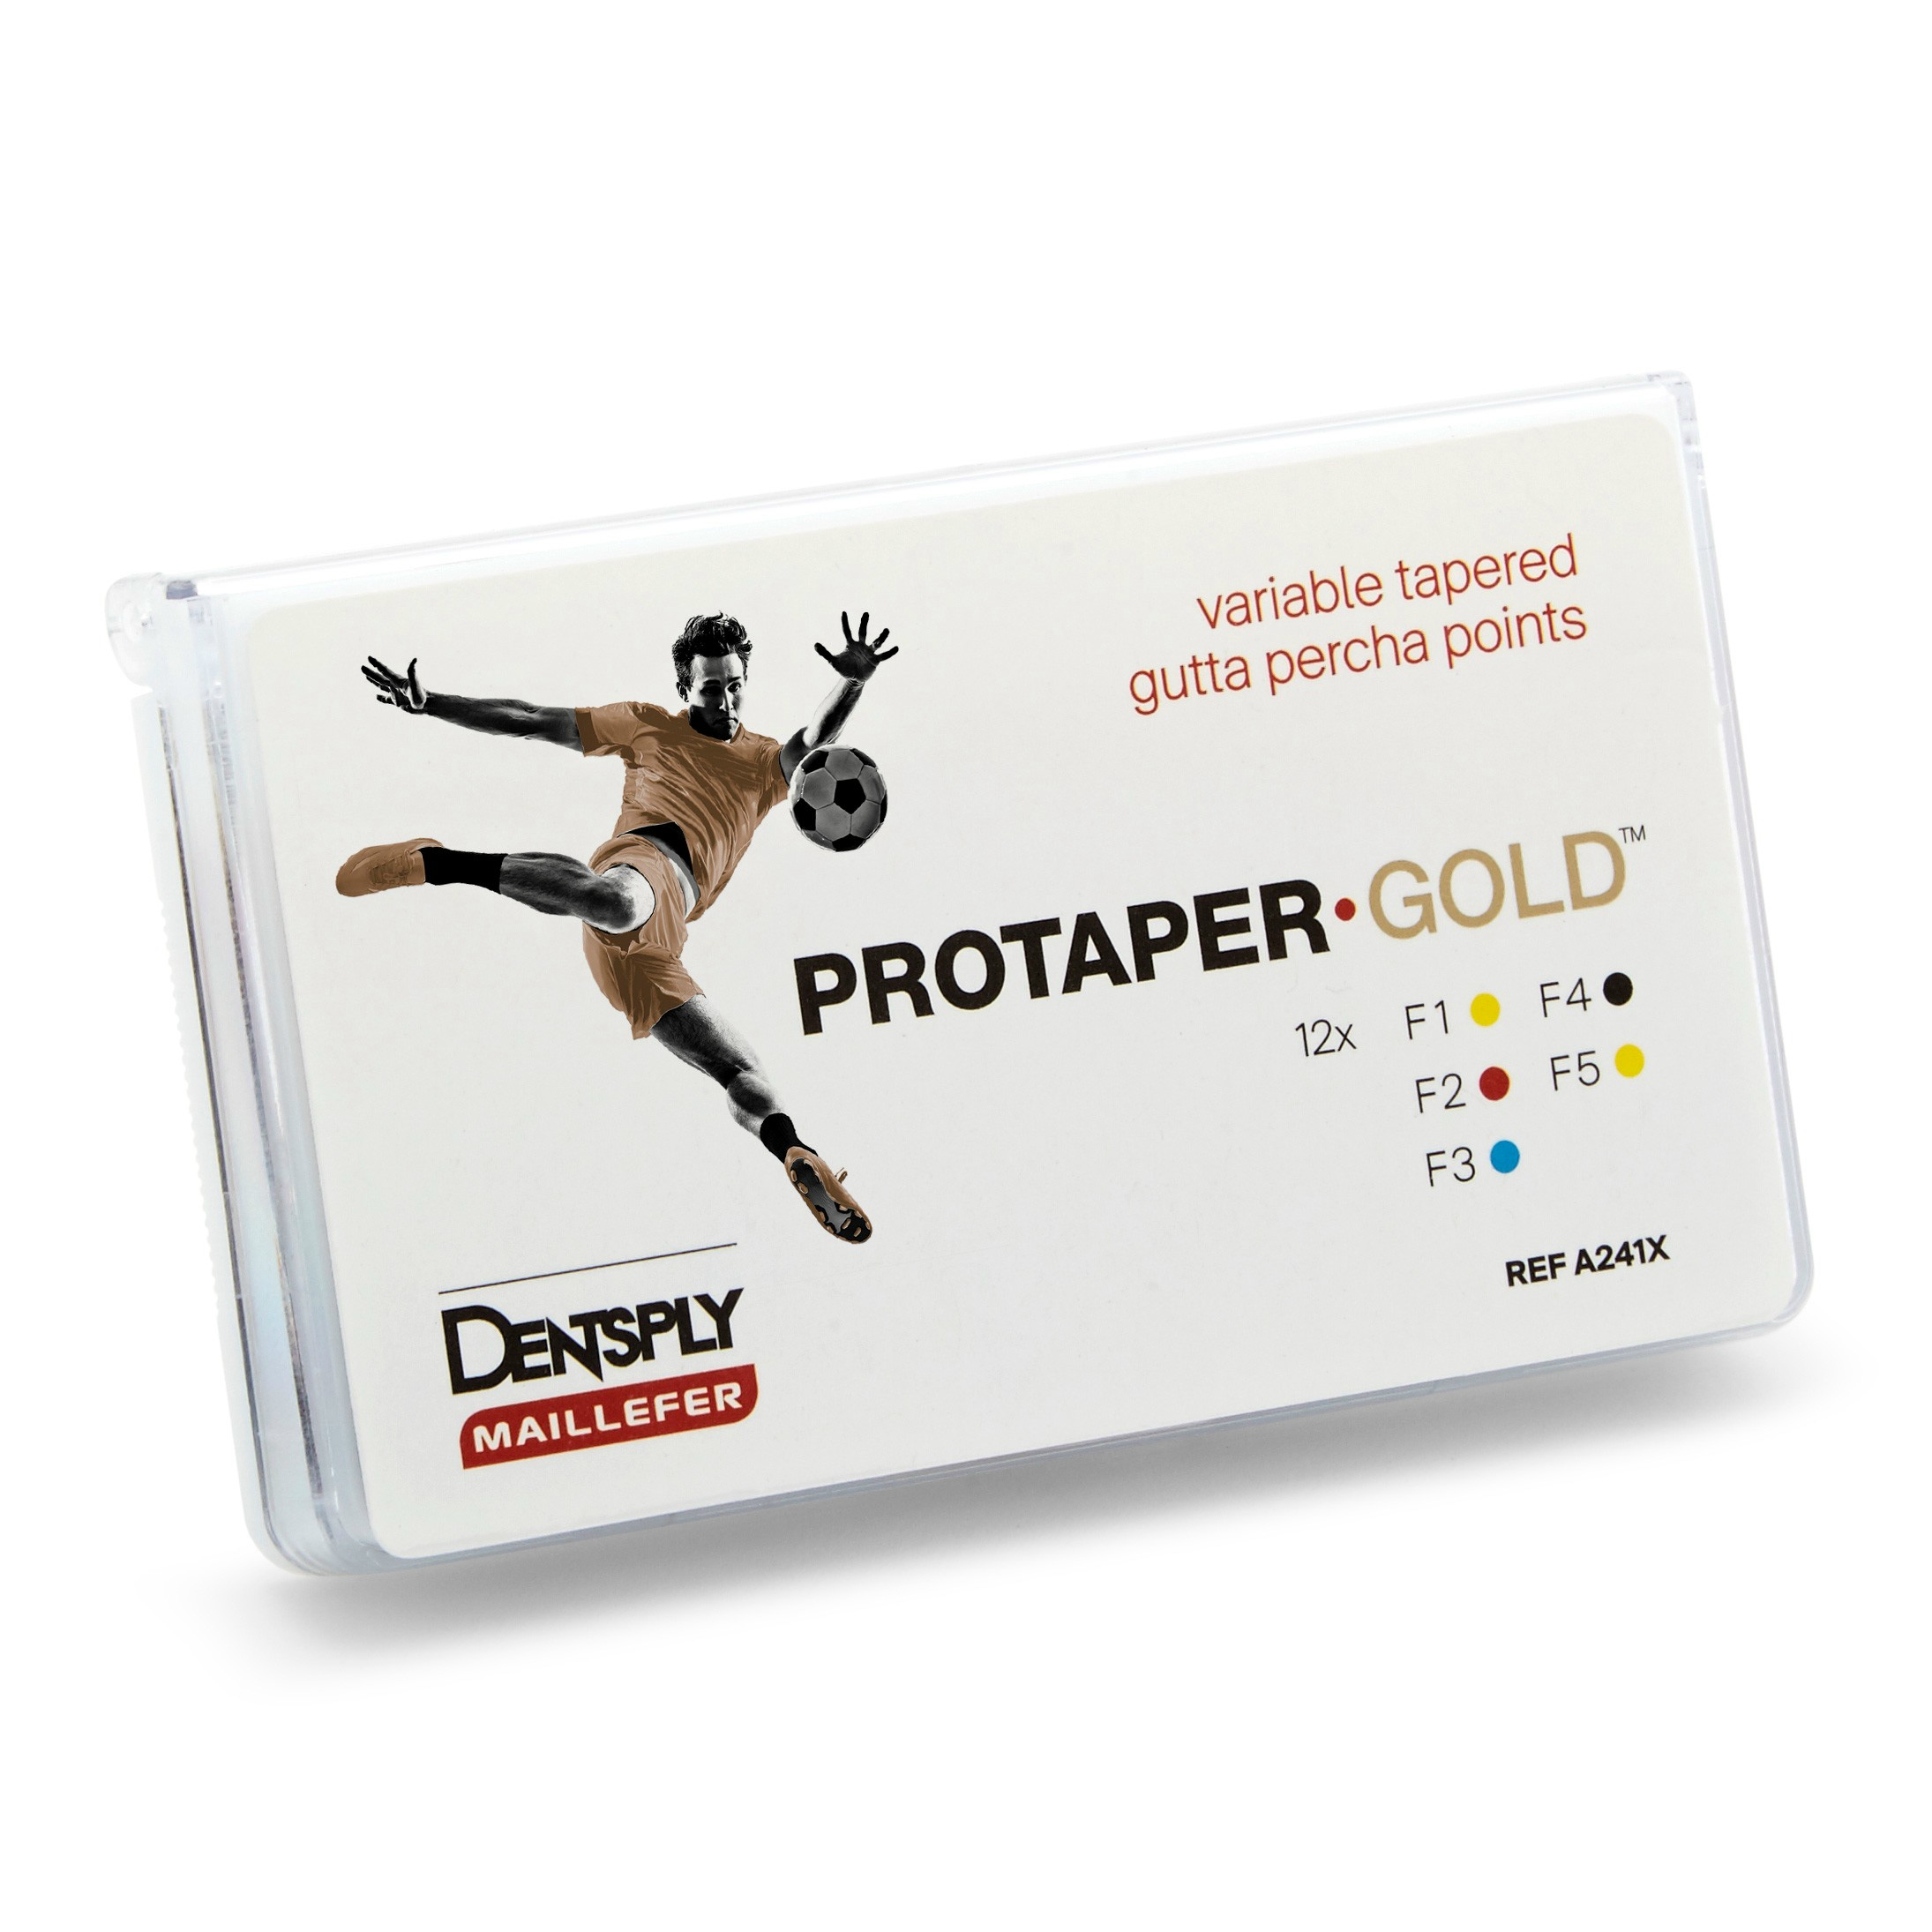 Protaper gold paper point F2